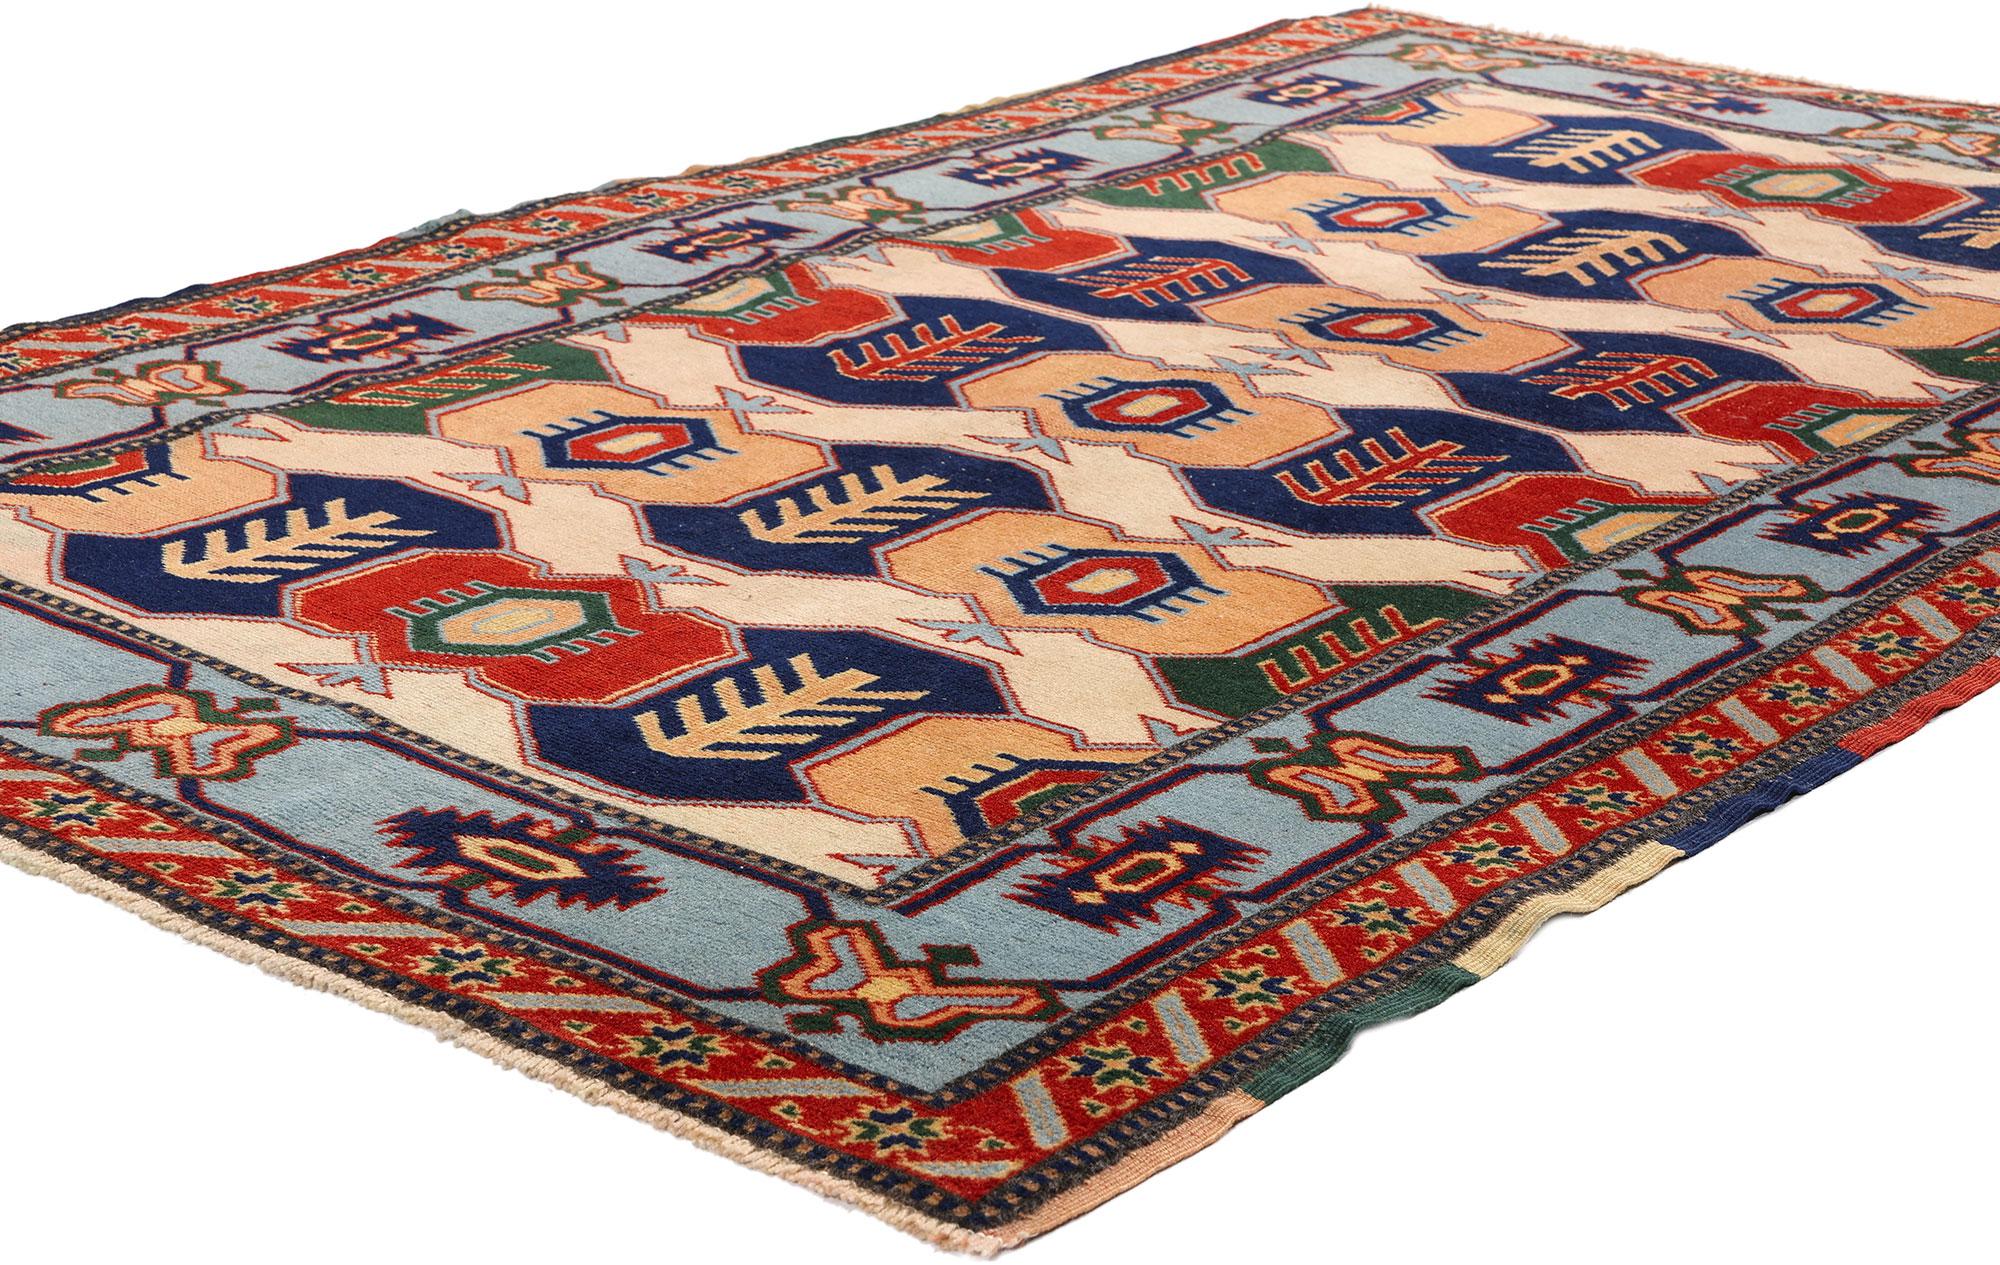 53923 Vintage Turkish Oushak Rug, 03'06 x 05'04. Hailing from the Western region of Oushak in Turkey, Turkish Oushak rugs have garnered widespread admiration for their intricate designs, gentle color palettes, and premium wool materials. Celebrated